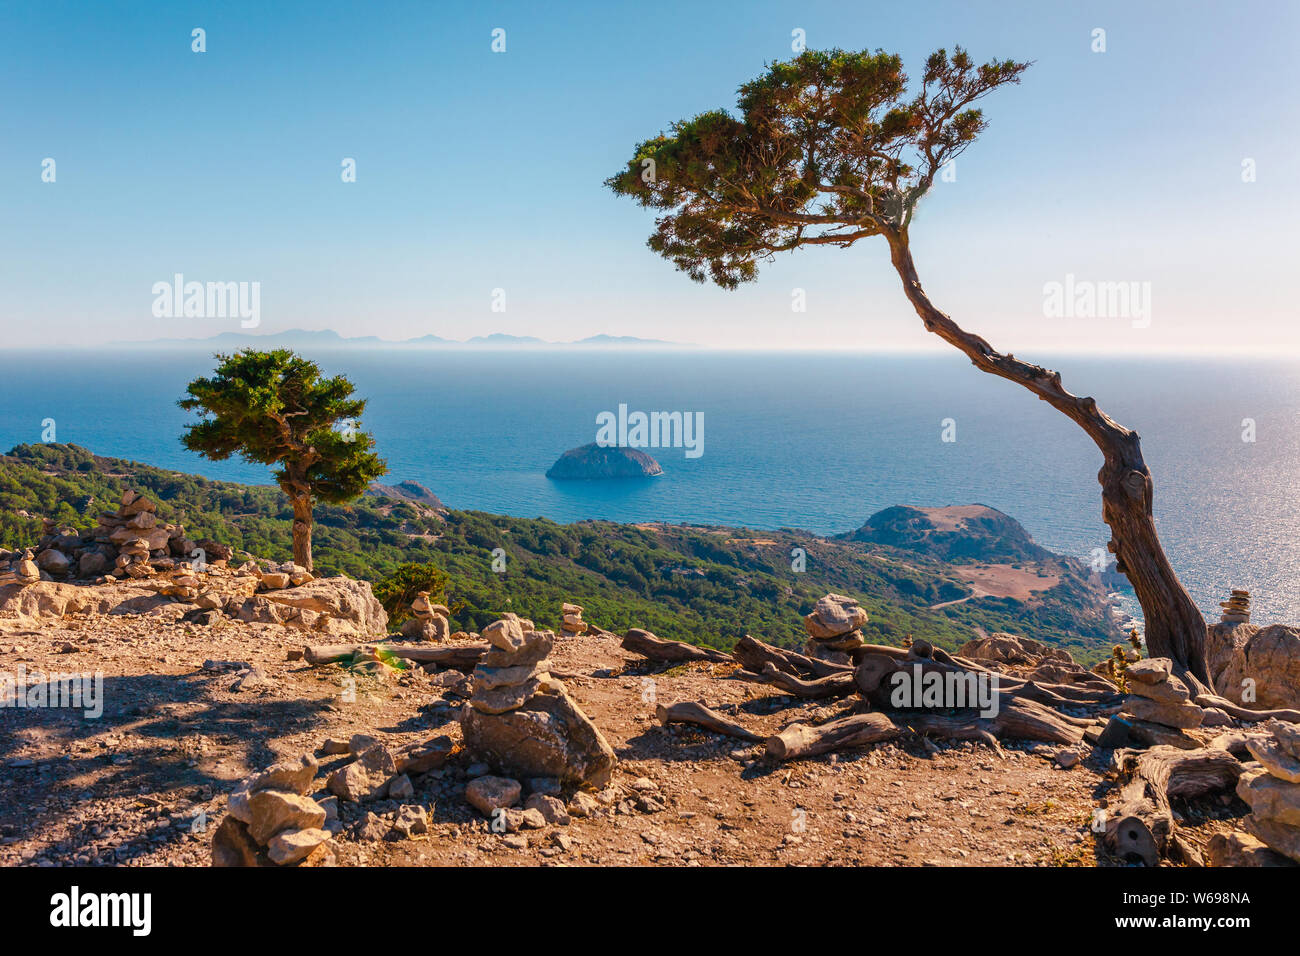 Sea skyview landscape photo from ruins of Monolithos castle on Rhodes island, Dodecanese, Greece. Panorama with green mountains and clear blue water. Stock Photo